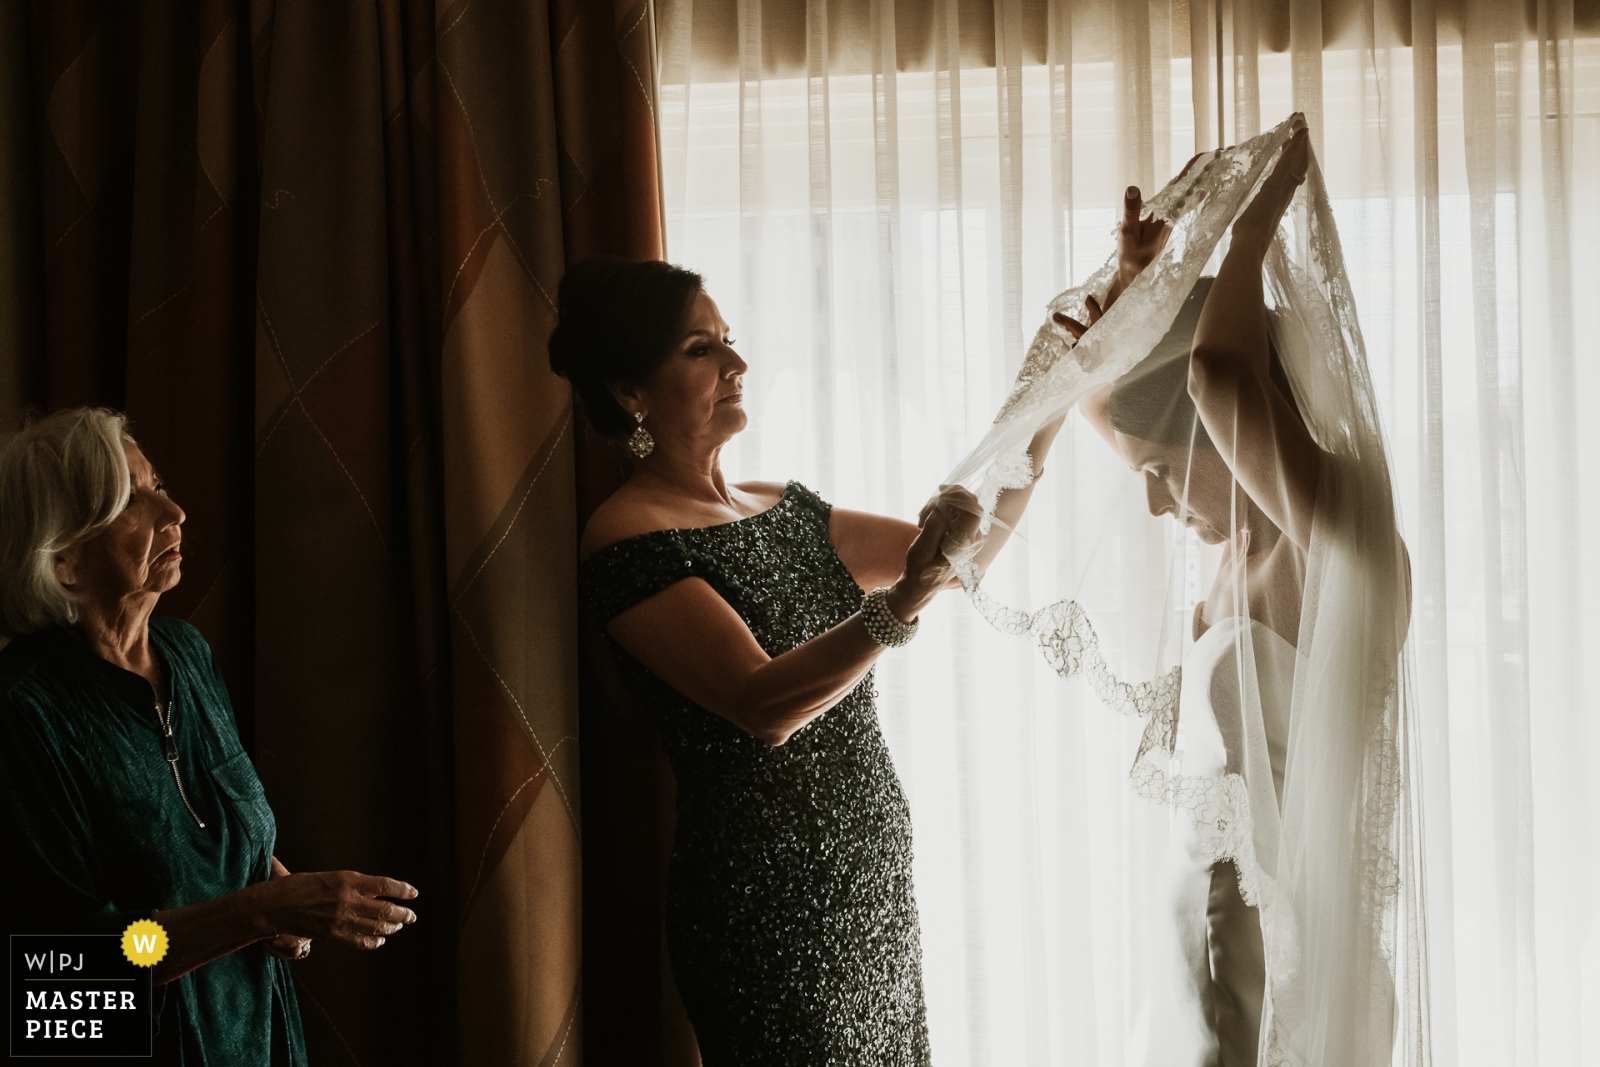 Mother and grandmother of the bride help bride with her veil at The Westin Riverwalk in San Antonio Texas - WPJA Award winning image